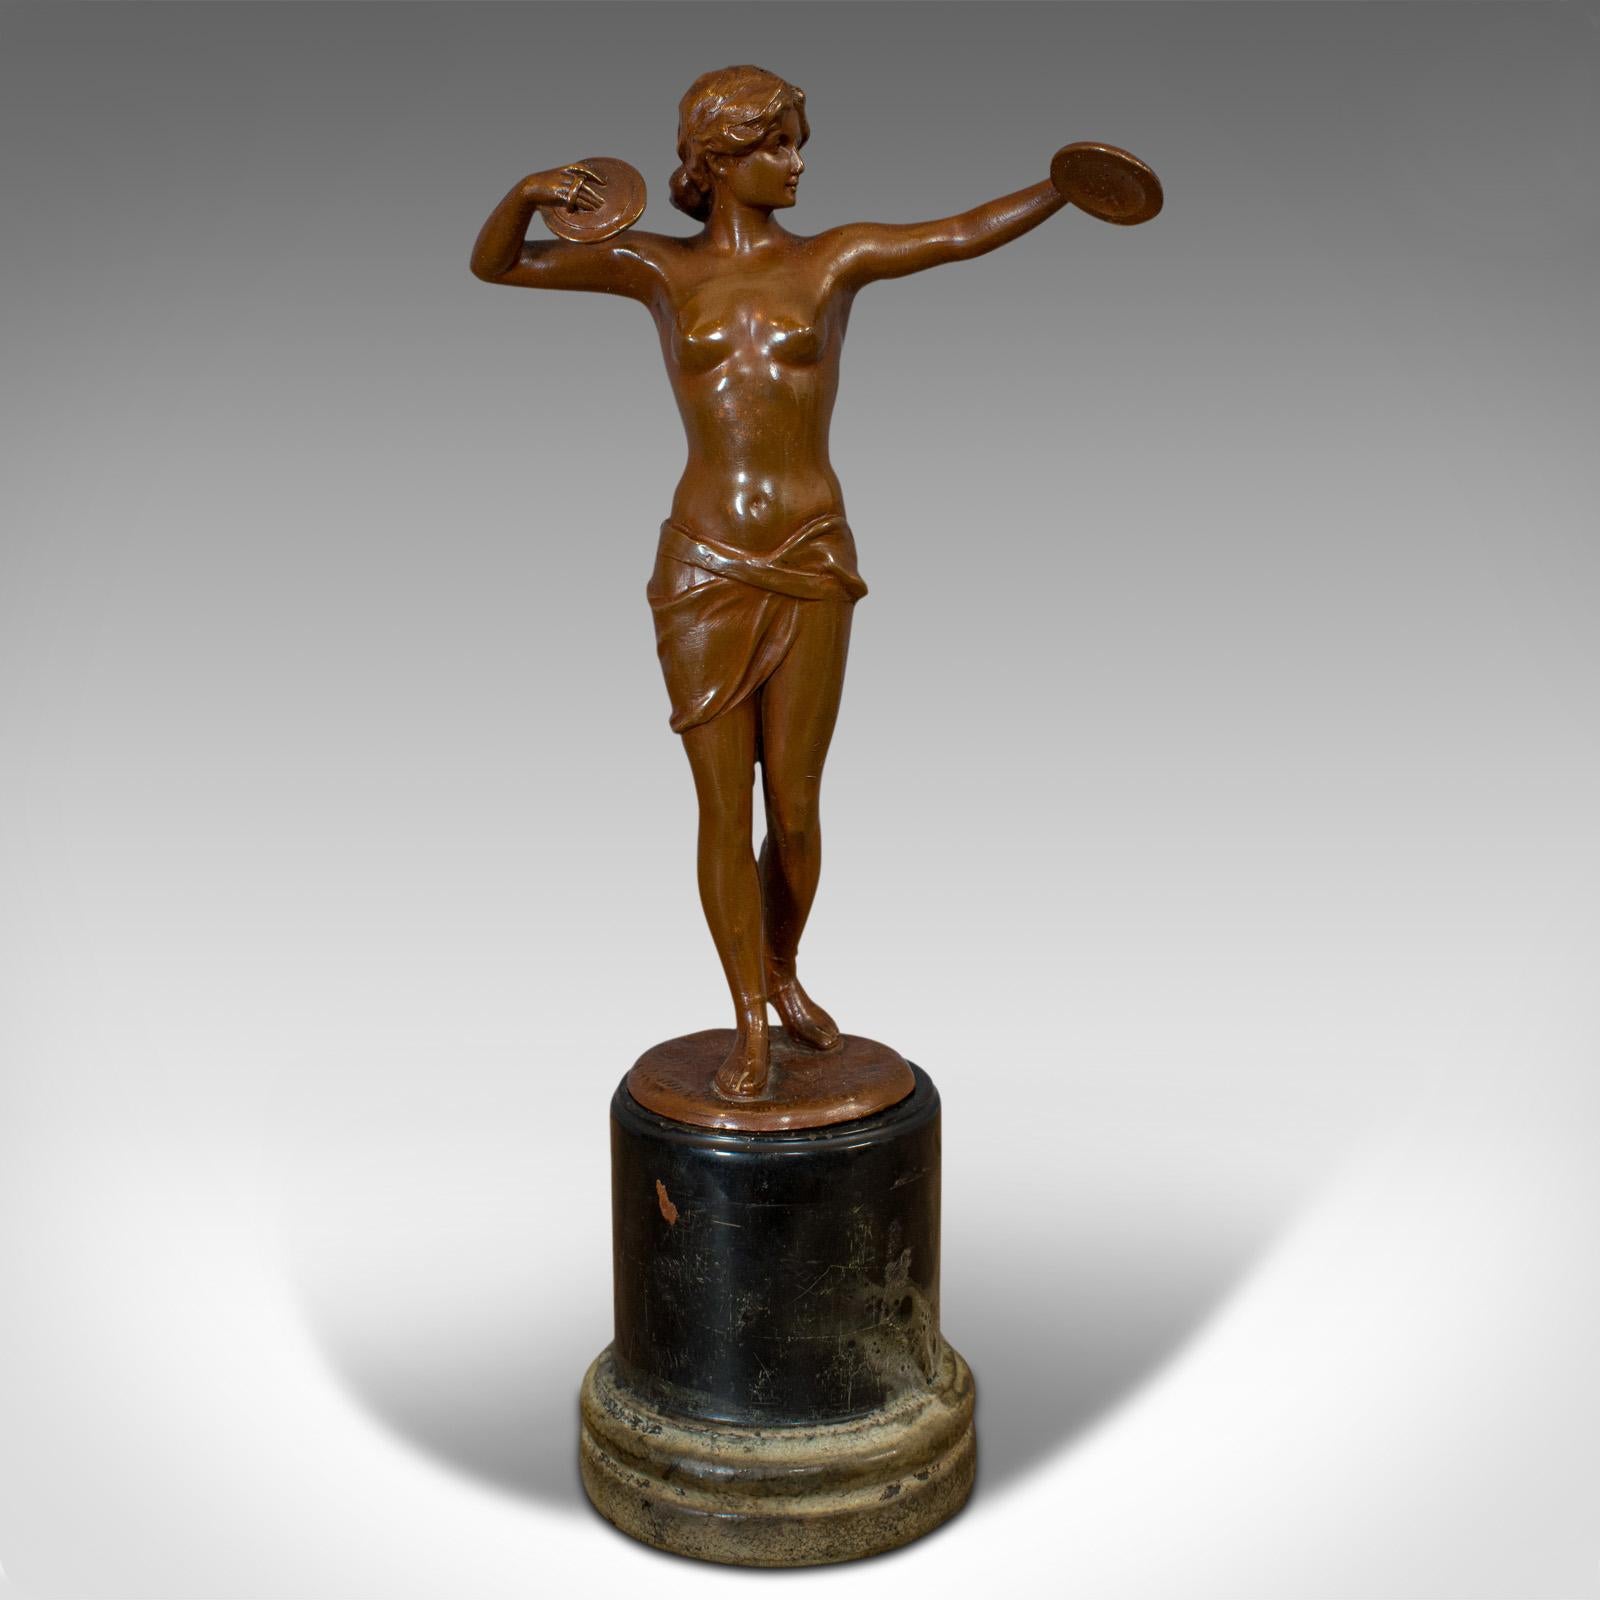 This is a vintage female figure. A French, bronze spelter Art Deco statuette, dating to the early 20th century, circa 1930.

Lithe gymnastic form
Displays a desirable aged patina
Bronze spelter in good order
Rich caramel hues